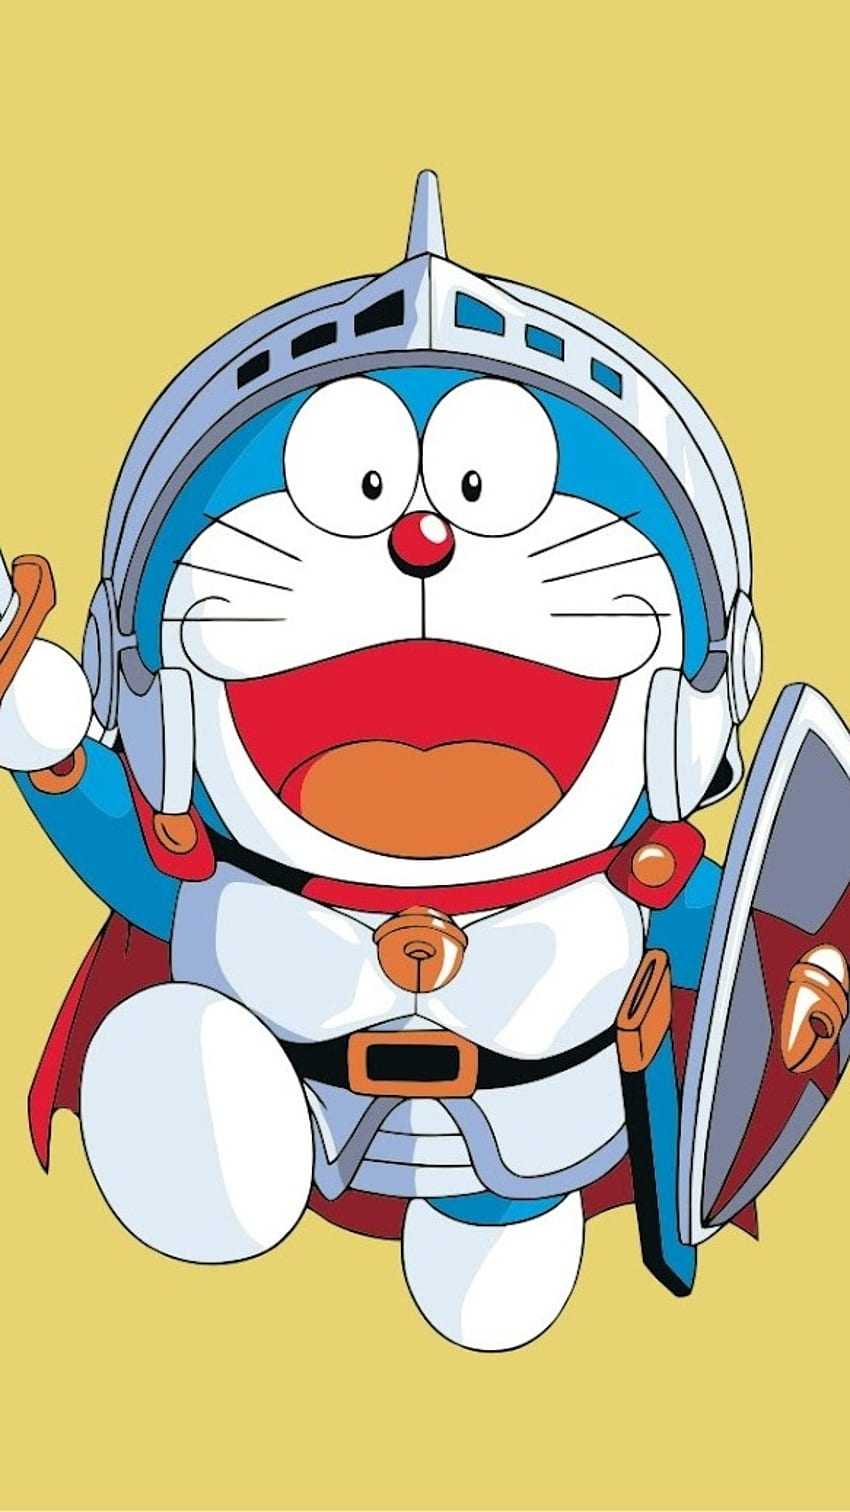 Doraemon Series by SHINEI Animation  Artworks for Sale  More  Artsy